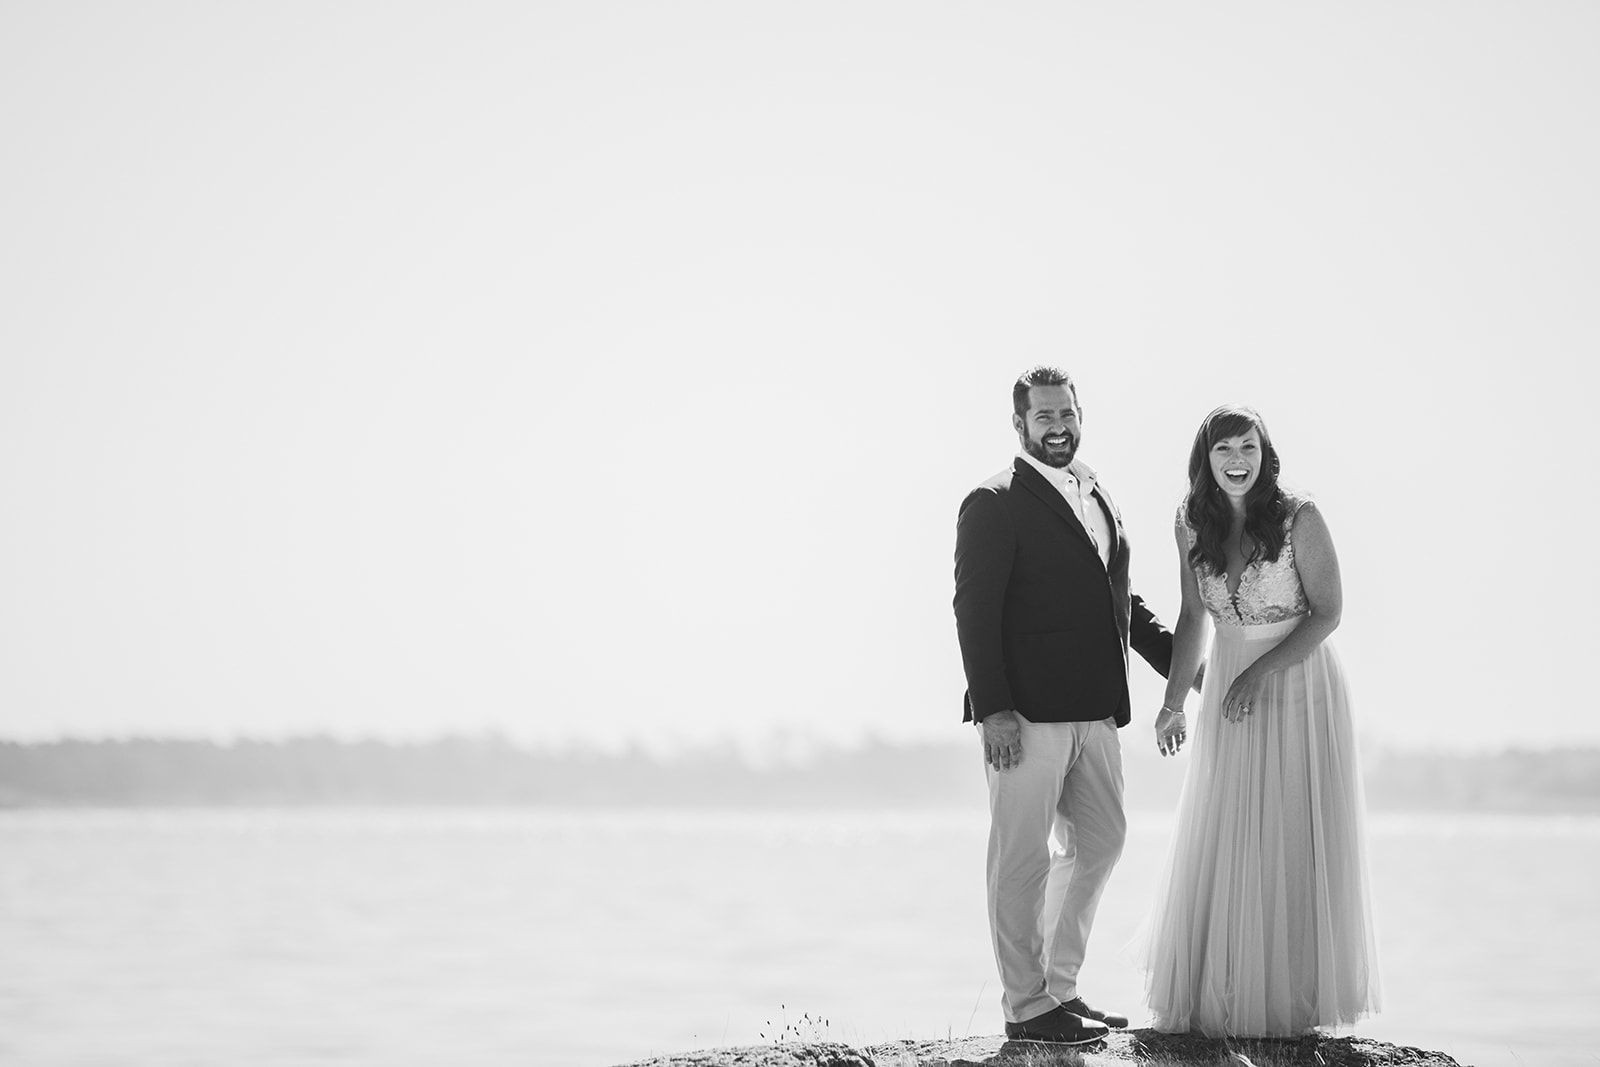 black and white wedding photo, wedding photography in Victoria BC, elopement photographer